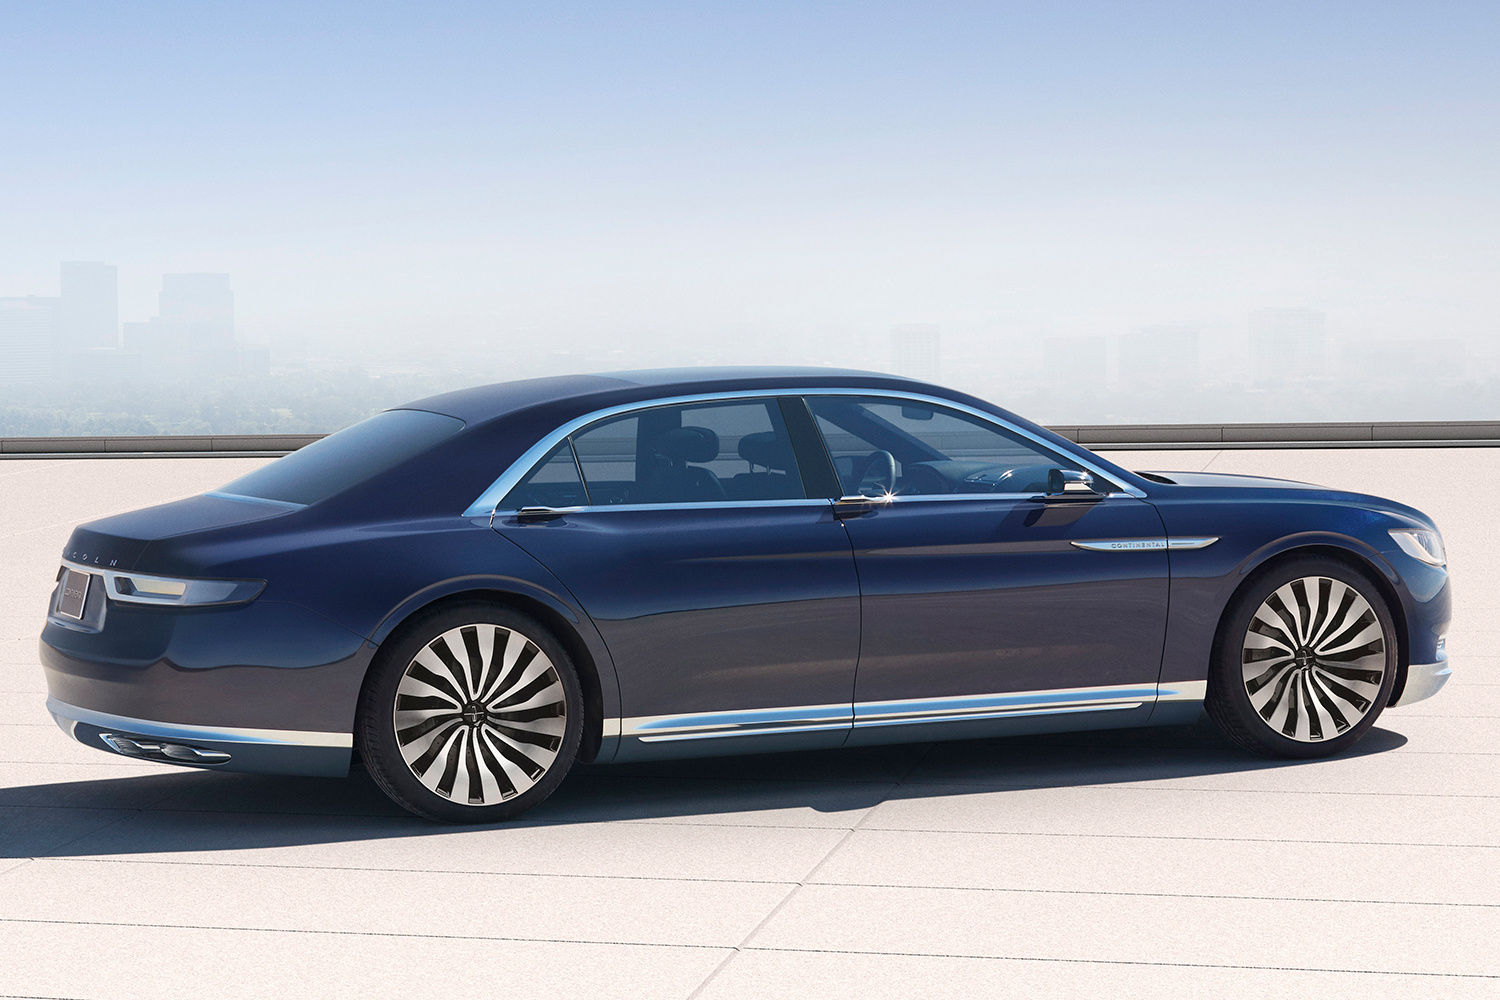 top 5 concept cars of 2015 opinion pictures specs lincolncontinentalconcept 03 rear